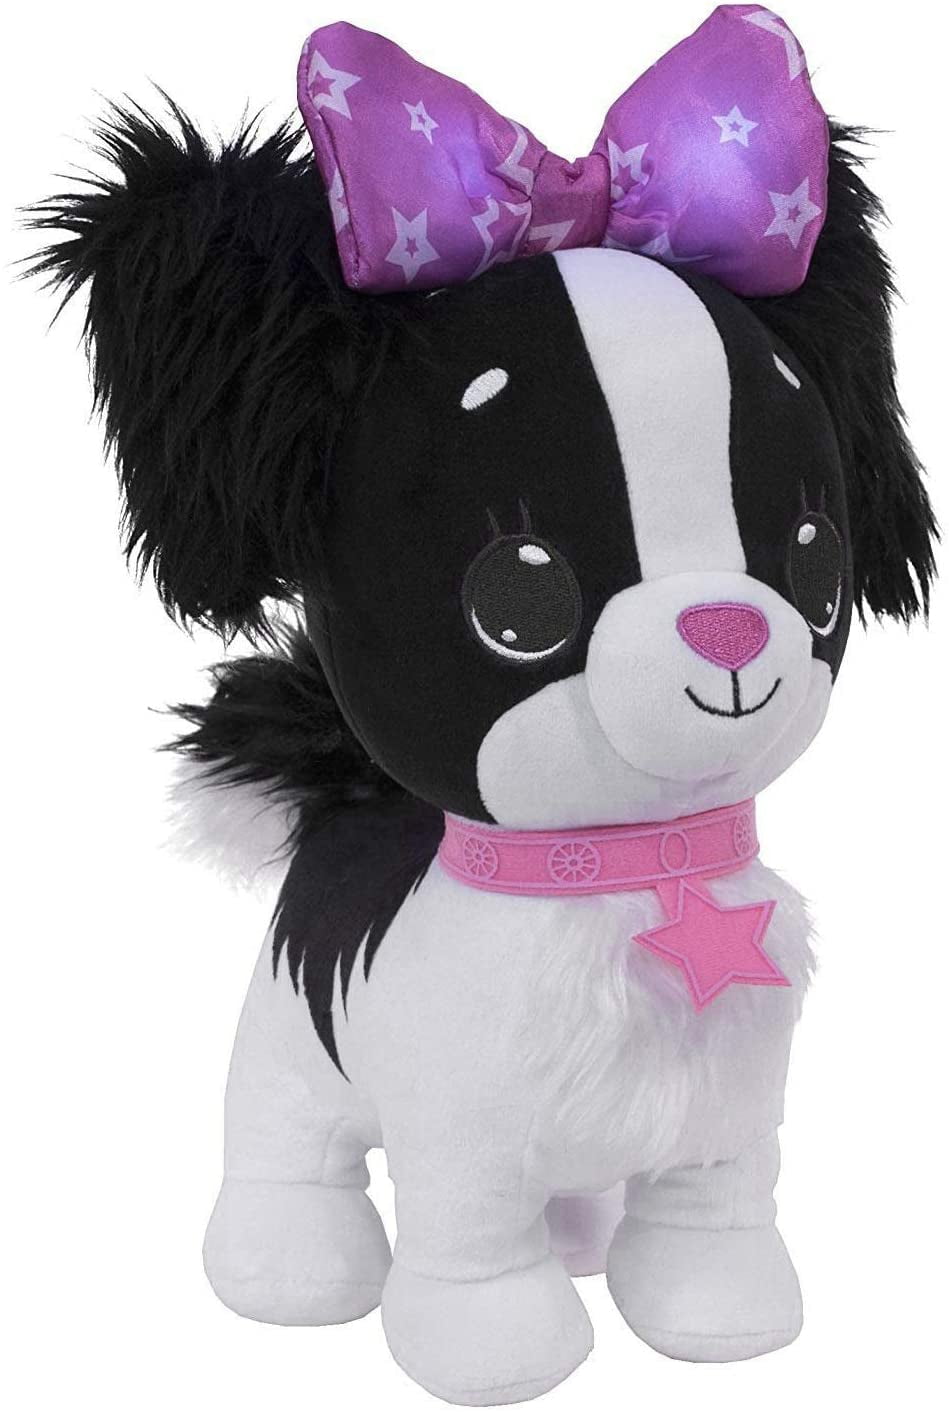 Wish Me Pets Puppy Pink Cavalier Light up Sounds 4 Touch Points 2018 for sale online 